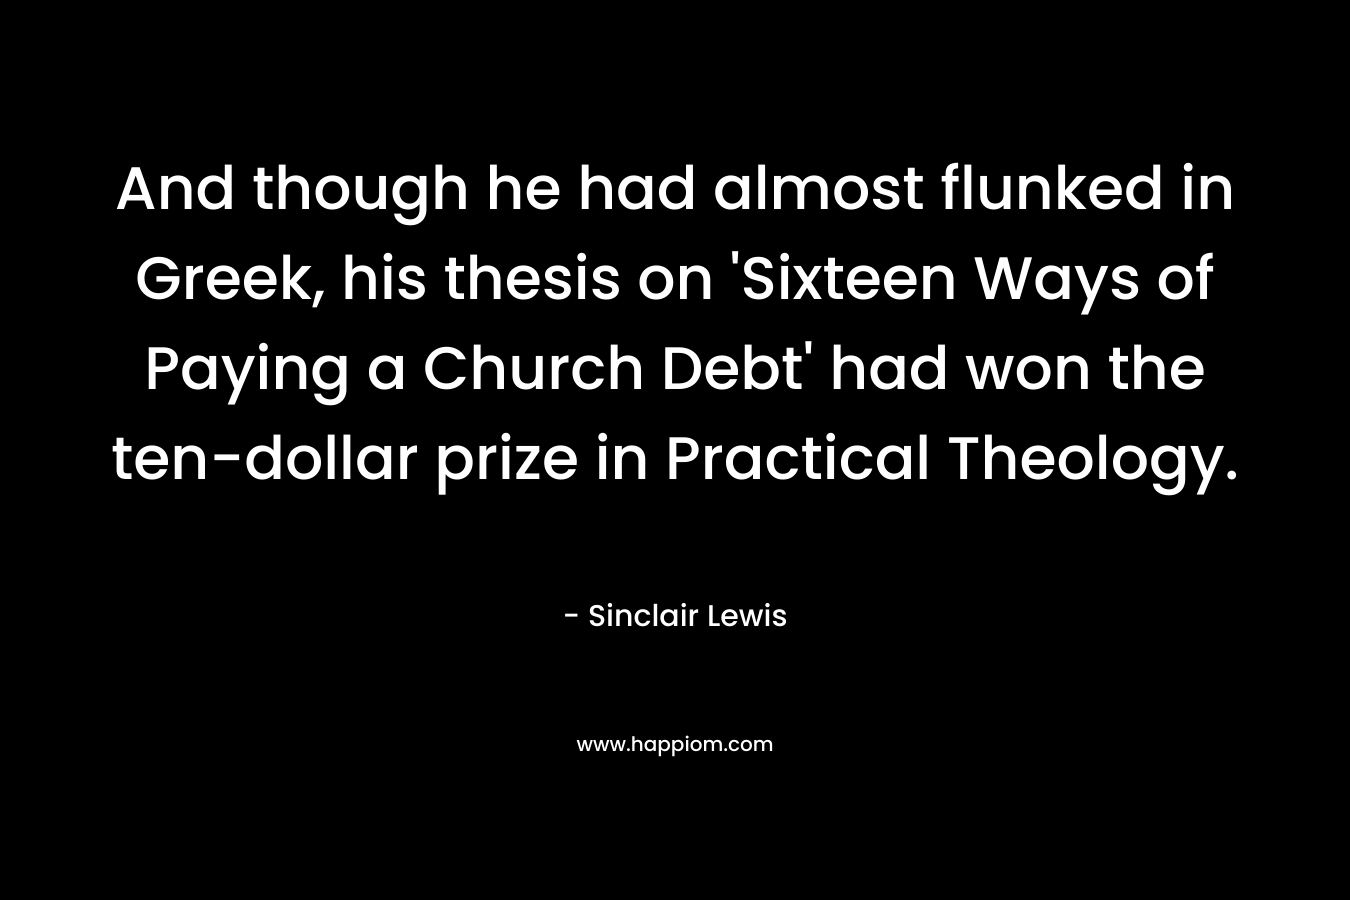 And though he had almost flunked in Greek, his thesis on ‘Sixteen Ways of Paying a Church Debt’ had won the ten-dollar prize in Practical Theology. – Sinclair Lewis